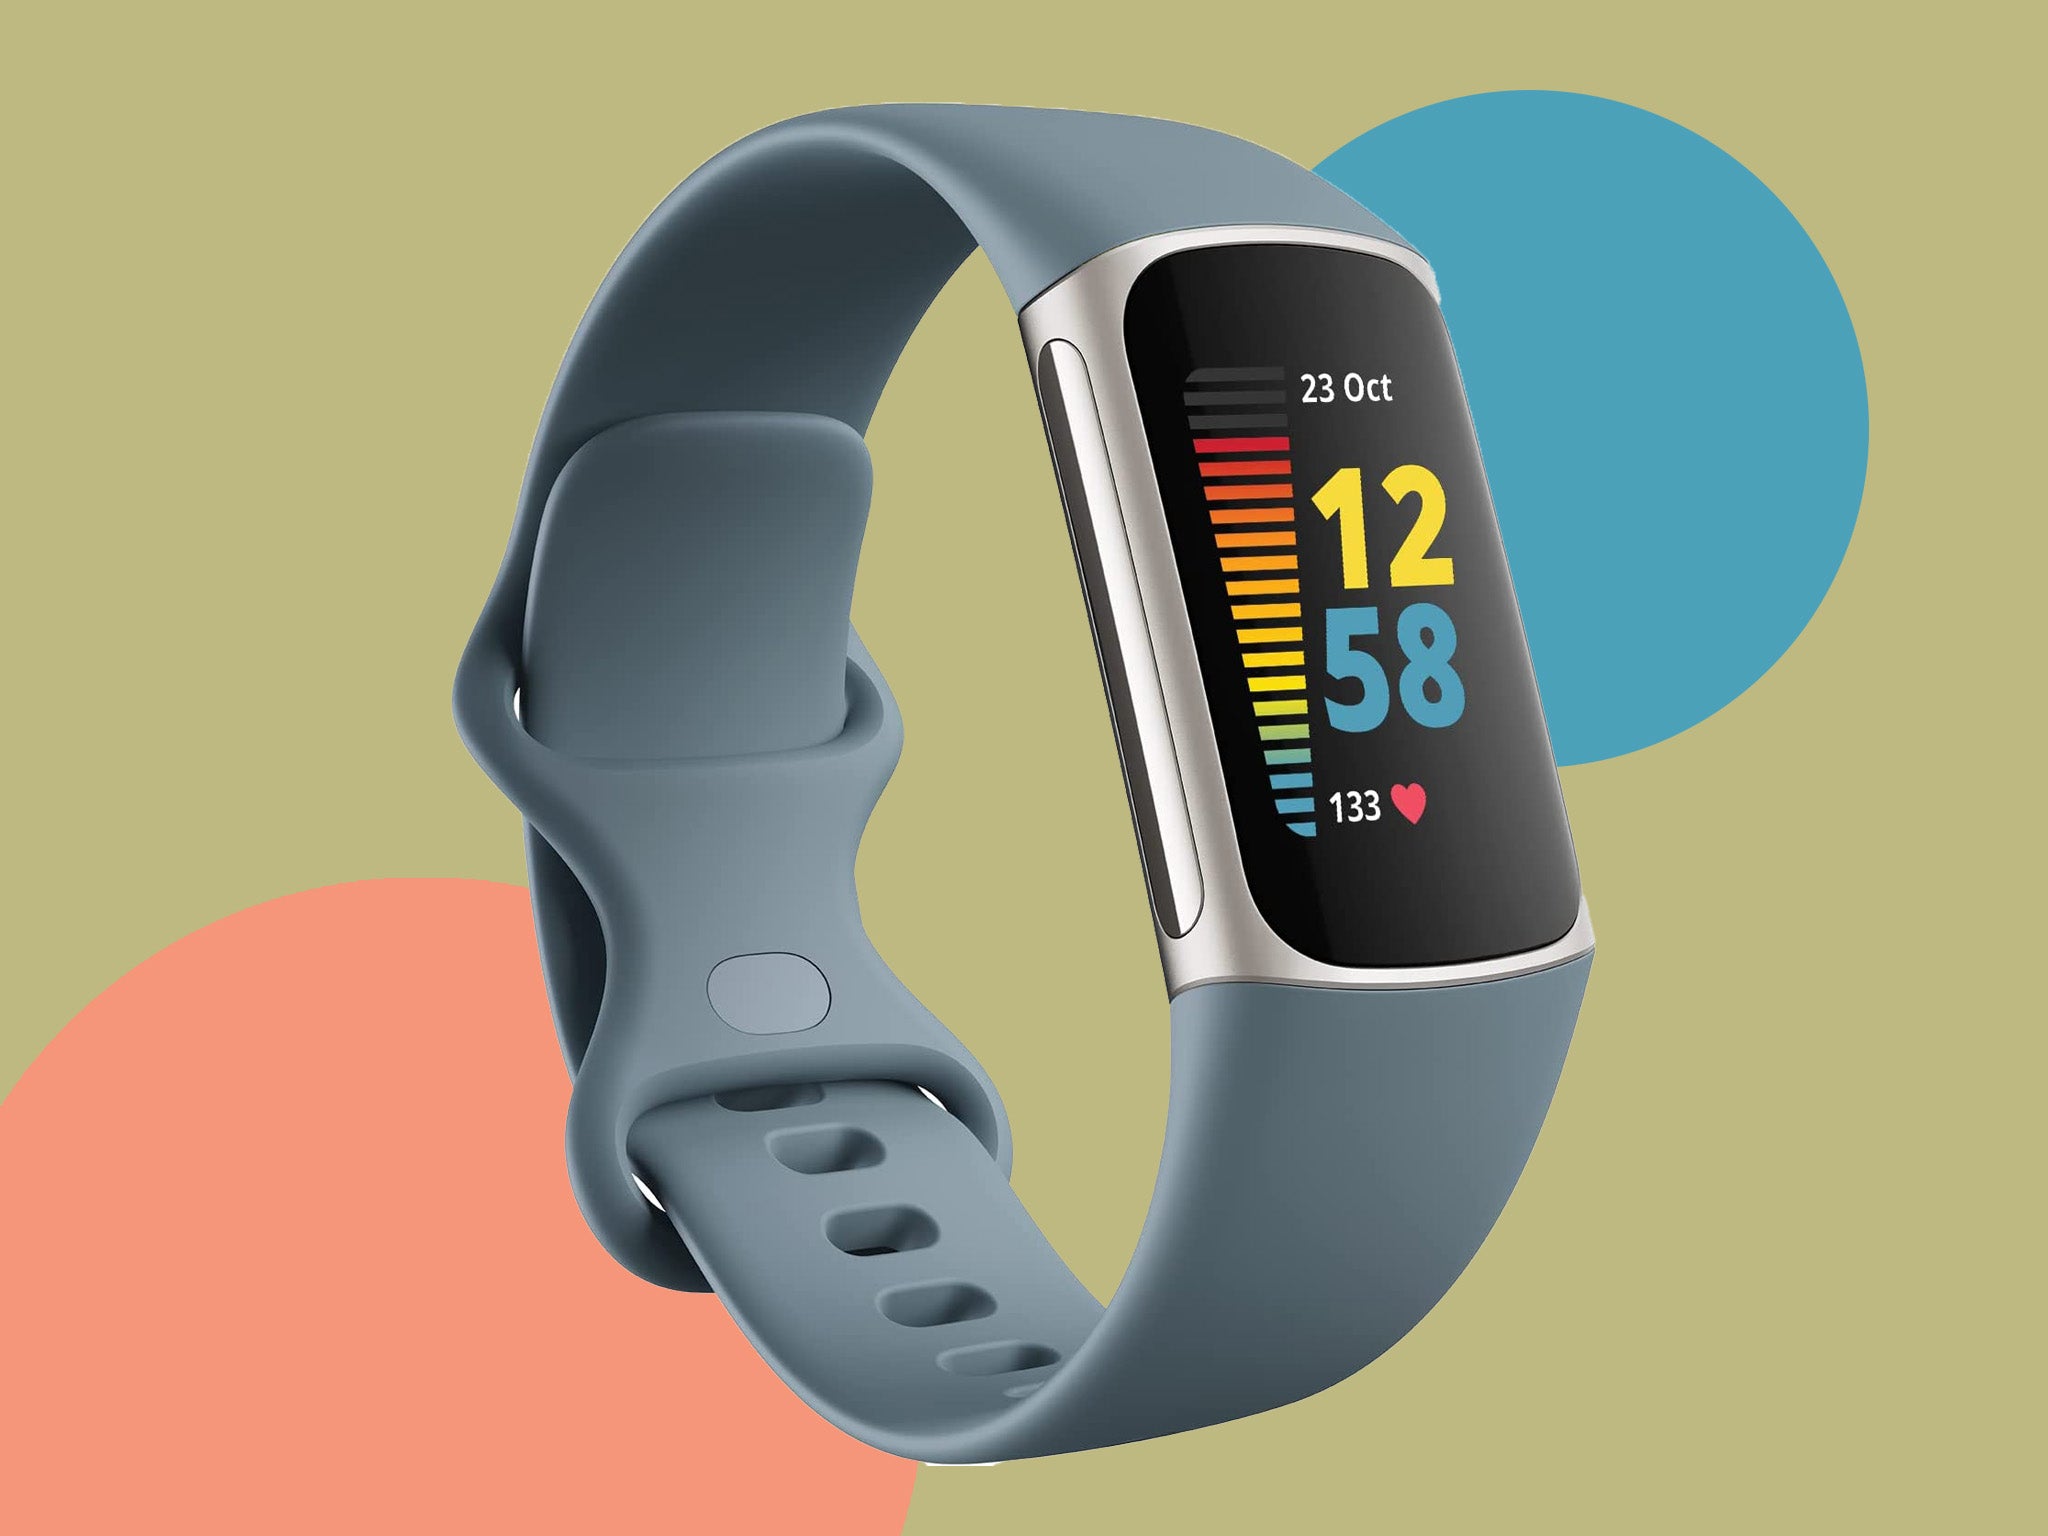 The charge 5 can be used to track daily steps, activity and running, plus there are 20 different exercise modes, heart-rate monitoring and sleep tracking